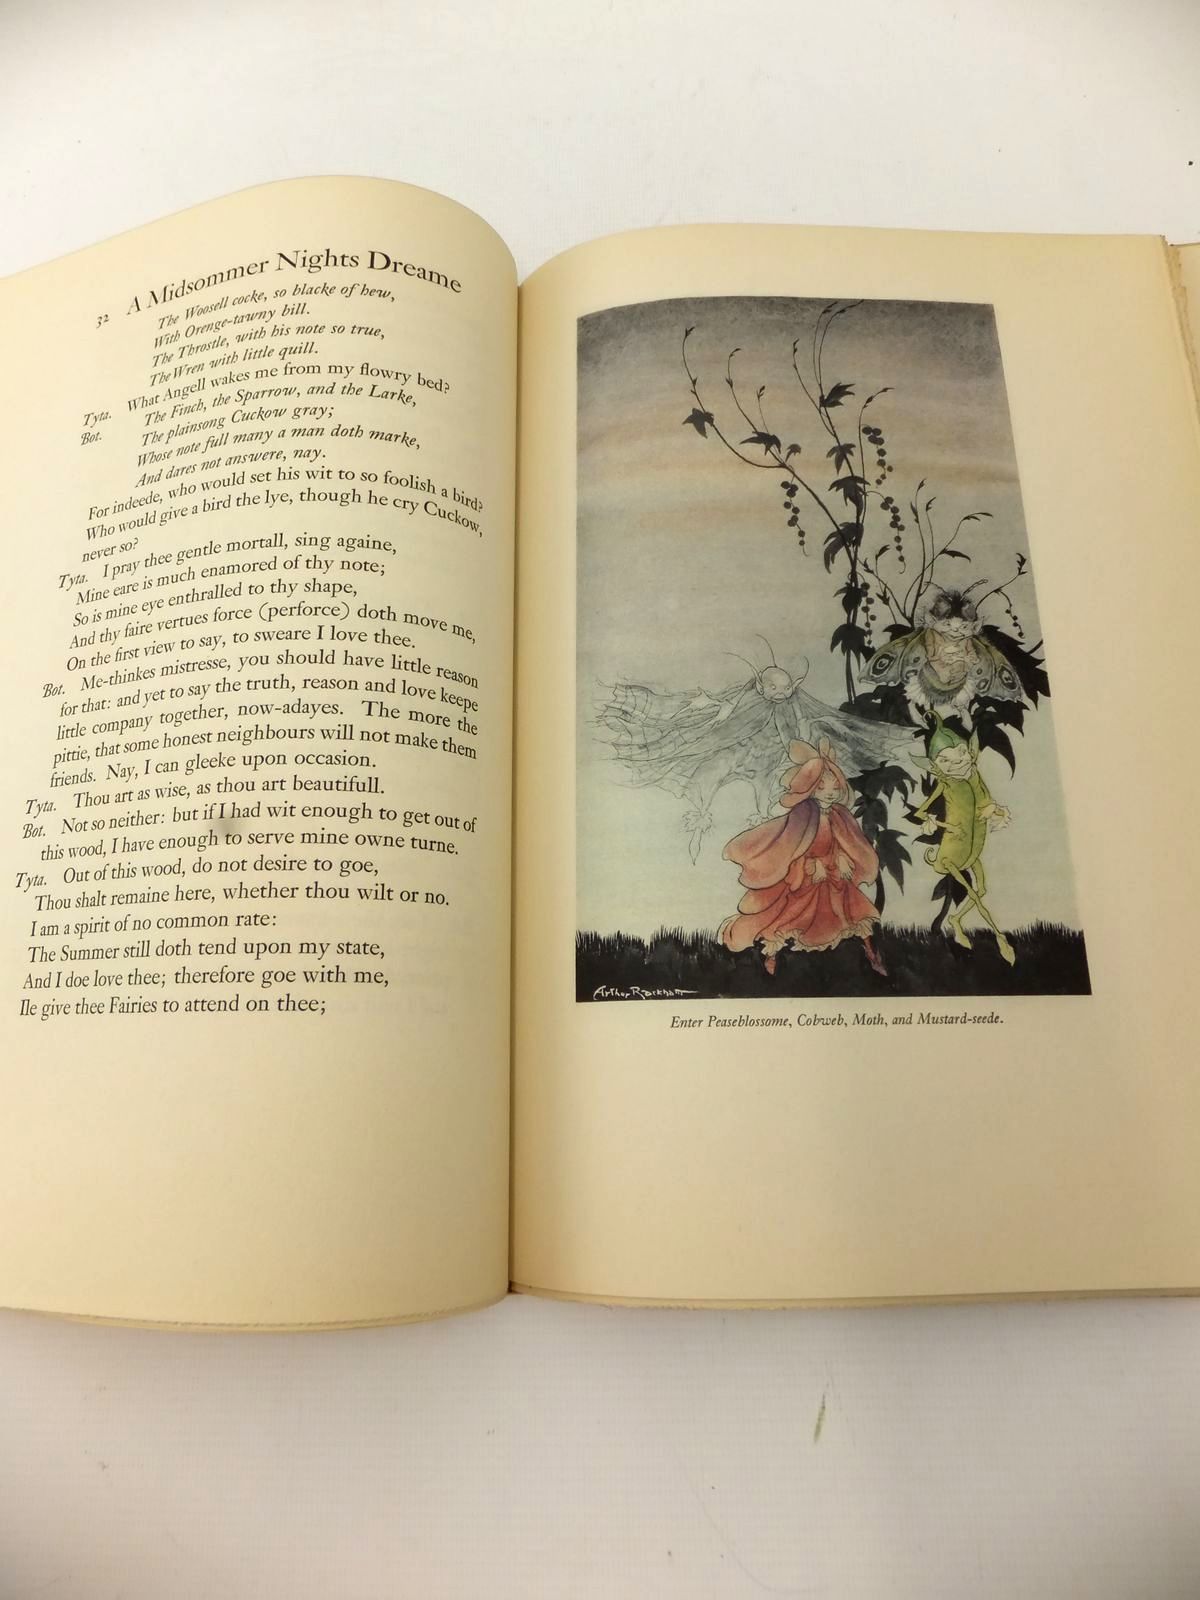 Photo of A MIDSUMMER NIGHT'S DREAM written by Shakespeare, William illustrated by Rackham, Arthur published by The Limited Editions Club (STOCK CODE: 1814113)  for sale by Stella & Rose's Books